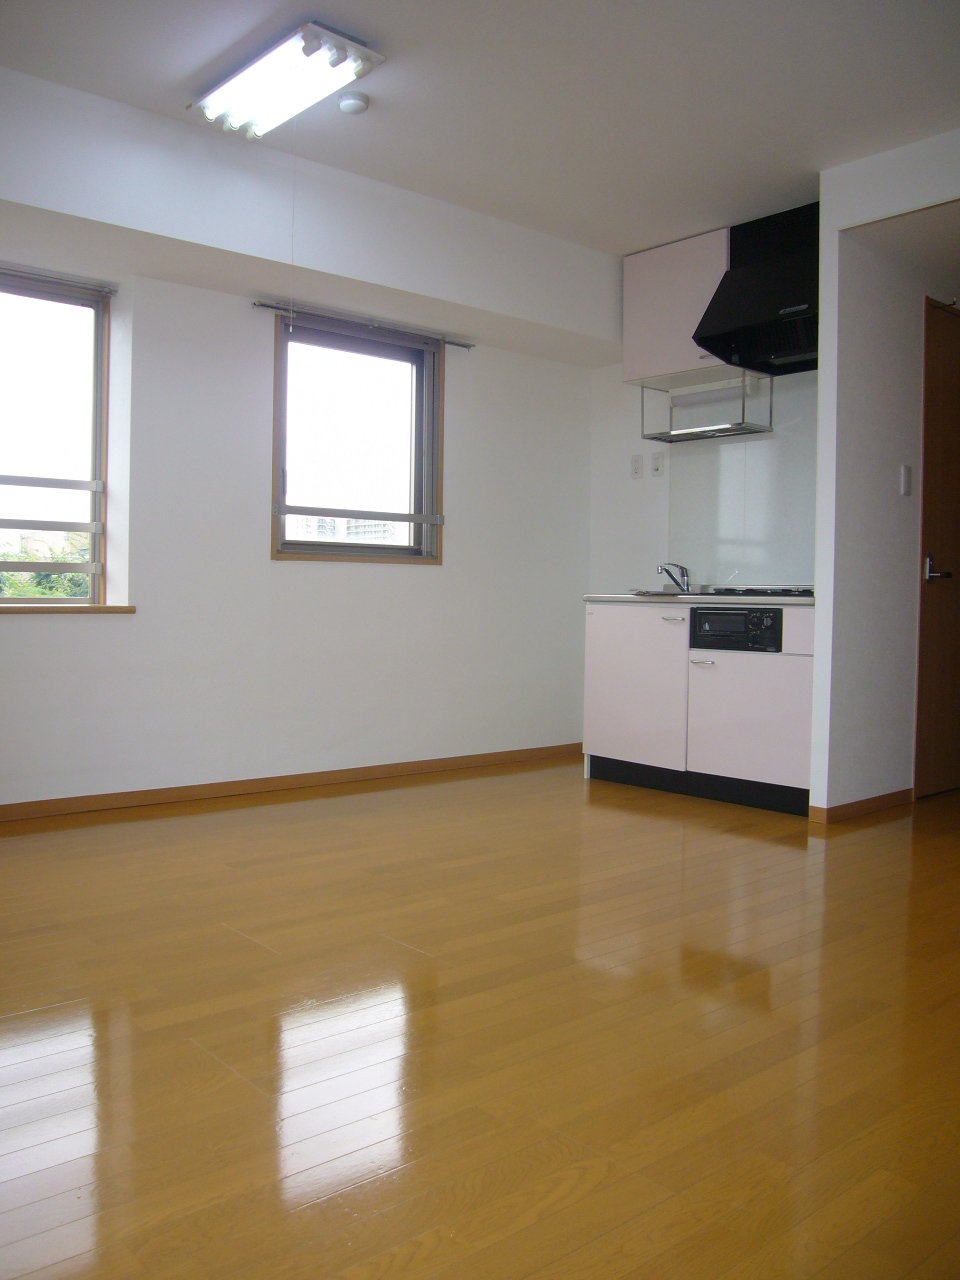 Living and room. Other Room No. ☆ Flooring